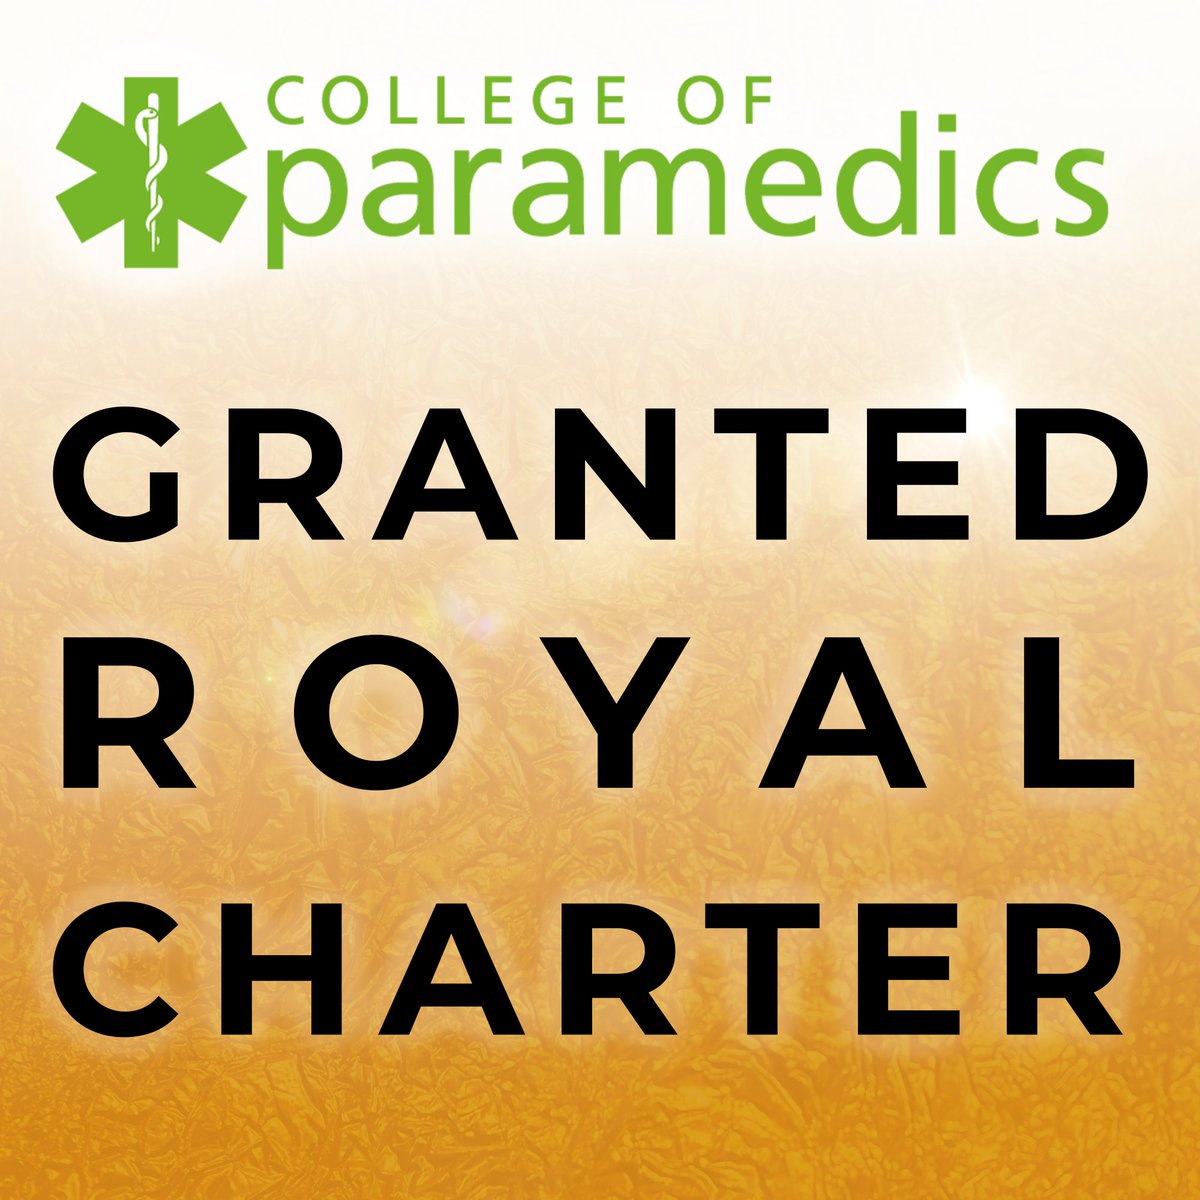 We’re incredibly excited to announce that we, the College of Paramedics have been awarded the Charter of Incorporation by His Majesty King Charles III 👑 Read more here 👉 bit.ly/49pe79J #CollegeOfParamedics #RoyalCharter